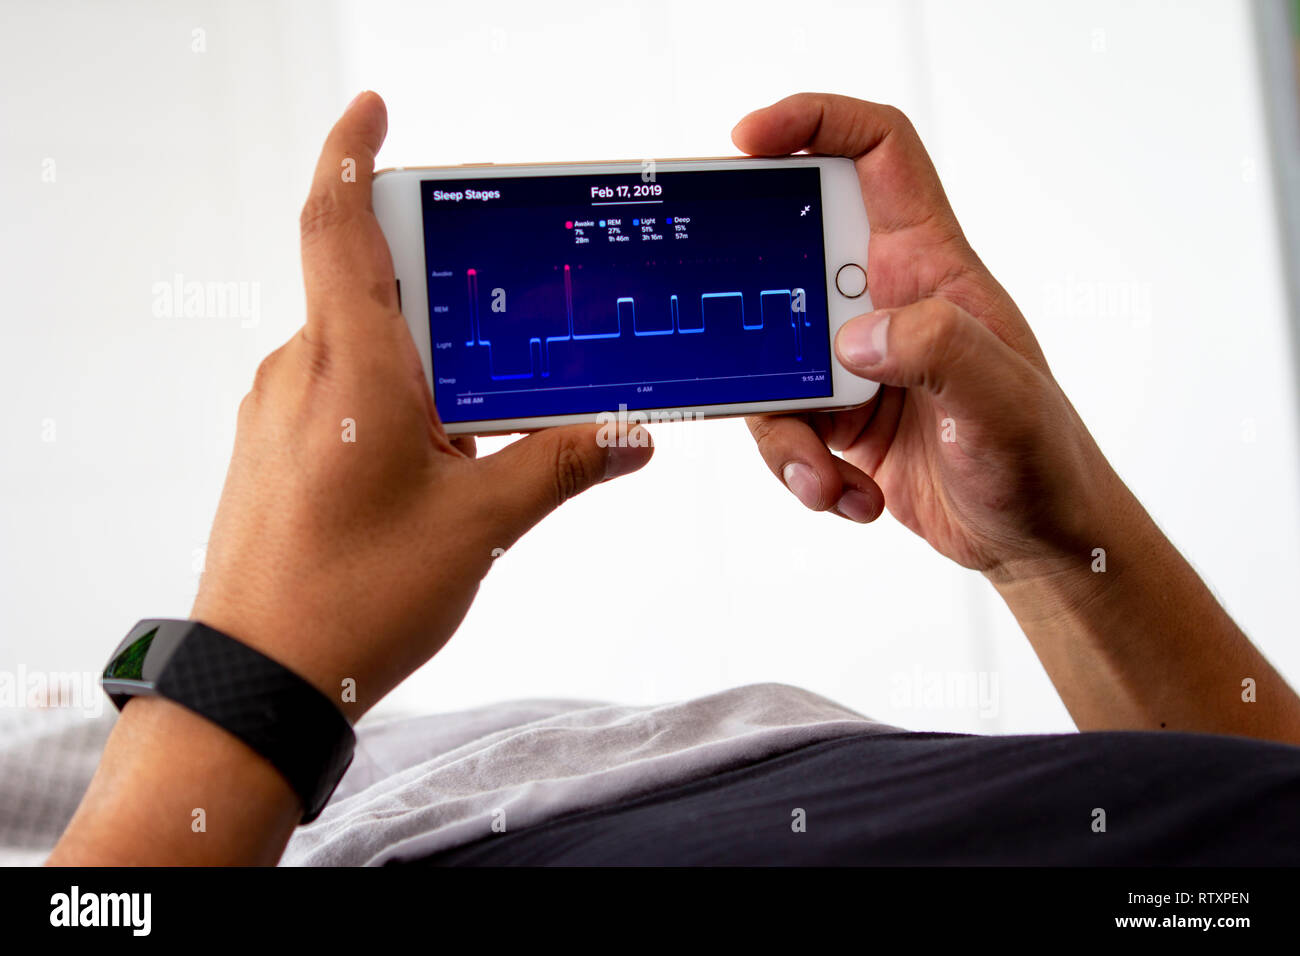 Lima, Peru - February 20 2019: Man waking up in the bed and monitoring his sleep night with a sleep-tracking app and a fitbit activity tracker wearabl Stock Photo